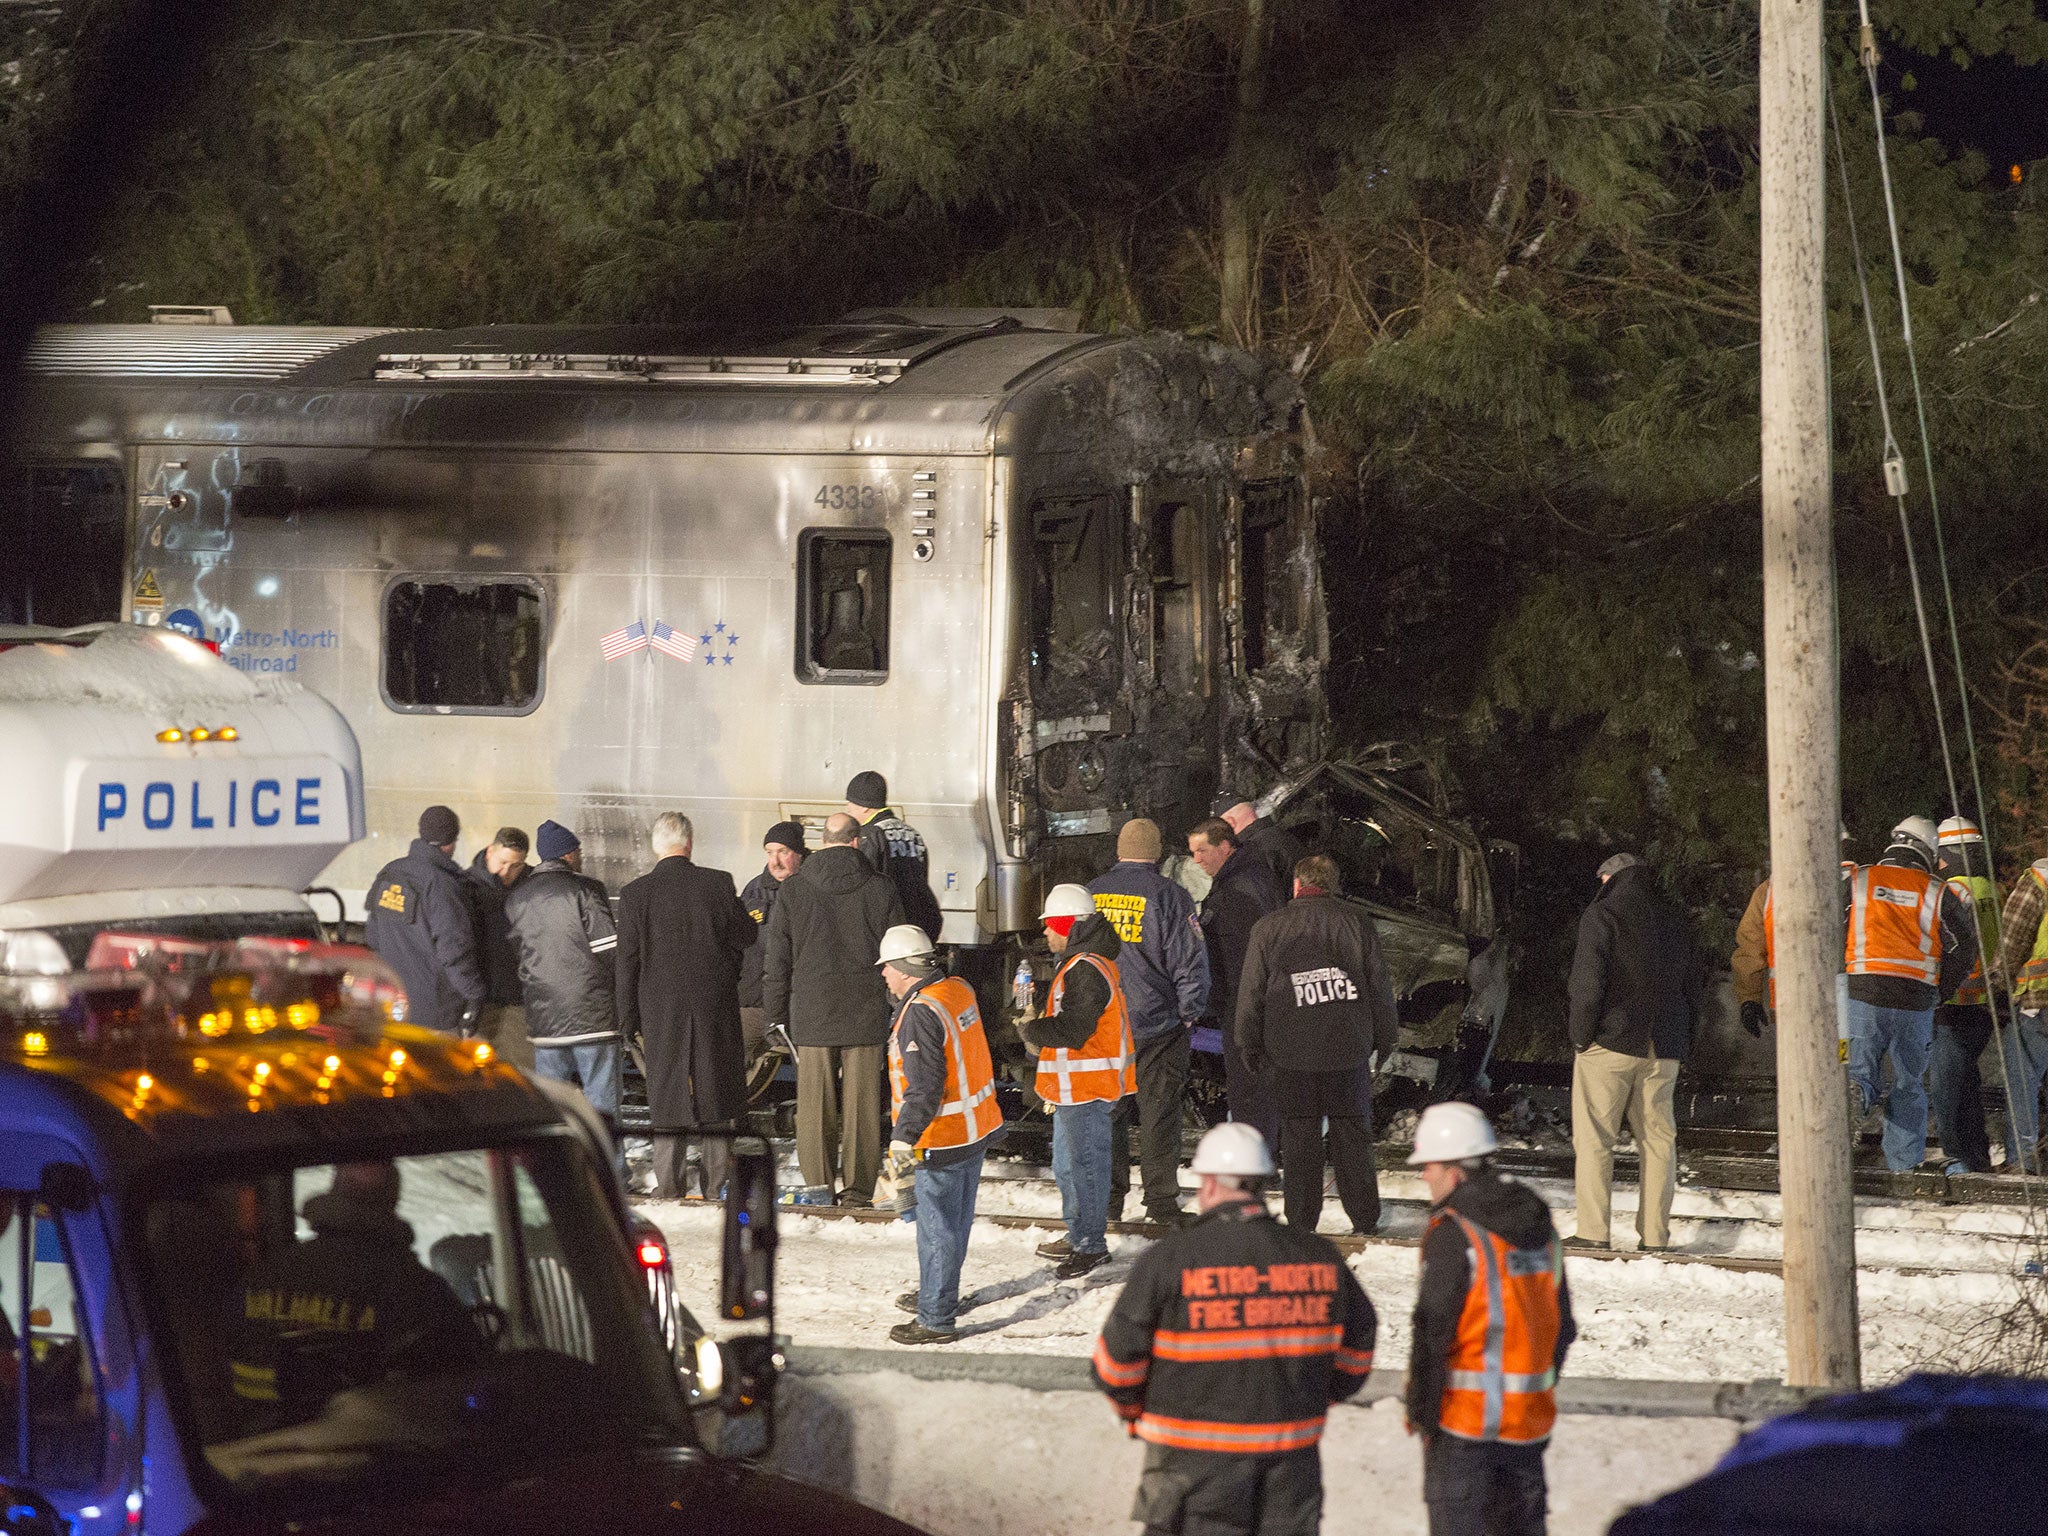 A Metro-North commutor train carrying hundreds of passengers struck a vehicle at a railroad crossing killing at least seven people and injuring many more